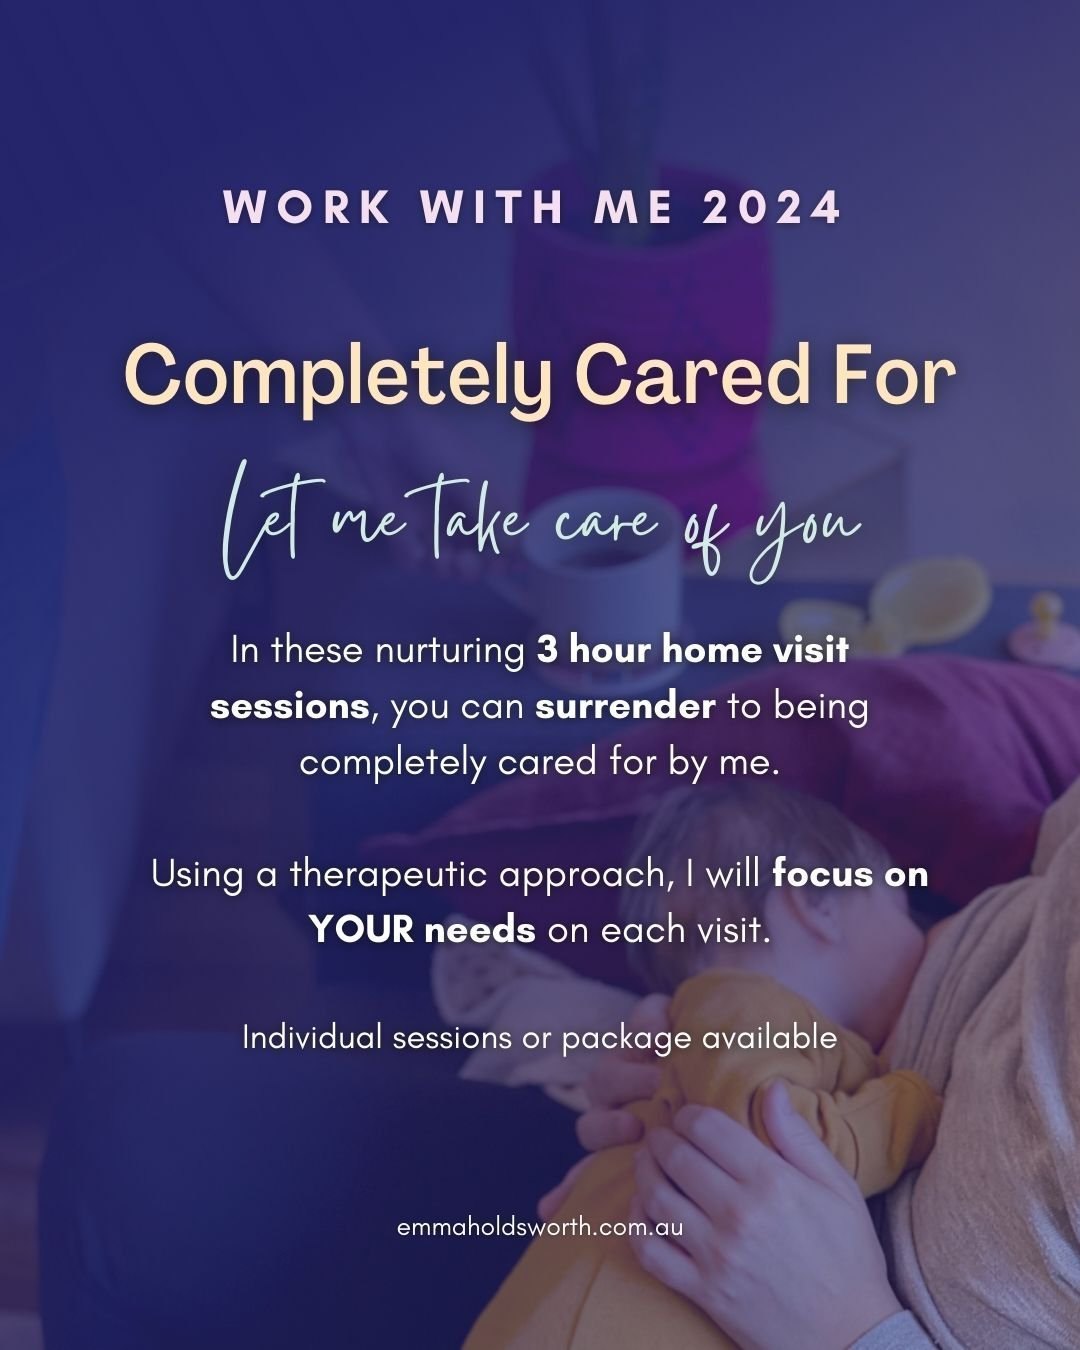 Completely Cared for // Let me take care of you.

In these nurturing 3 hour home visit sessions, you can surrender to being completely cared for by me. 

Using a therapeutic approach, I will focus on YOUR needs on each visit.

Individual sessions or 